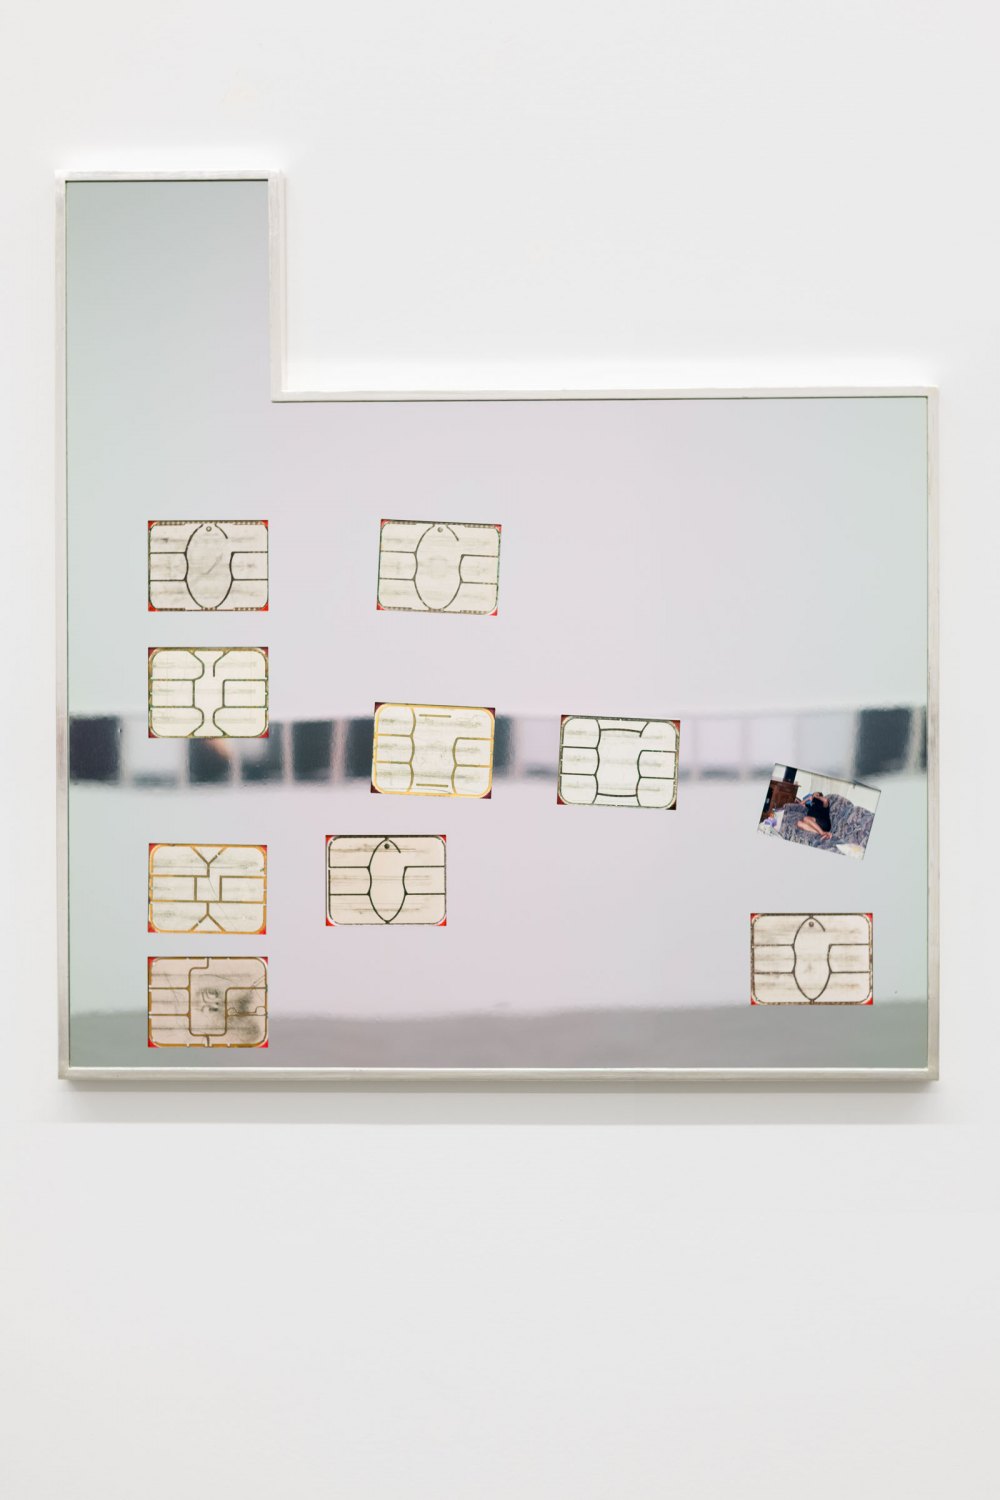 Flagged Identity (5), 2021 Archival pigment prints of my active and inactivebank cards chips, found photo, mirror finished stainless steel, and white gold leafed frame 126 x 121.5 x 6 cm